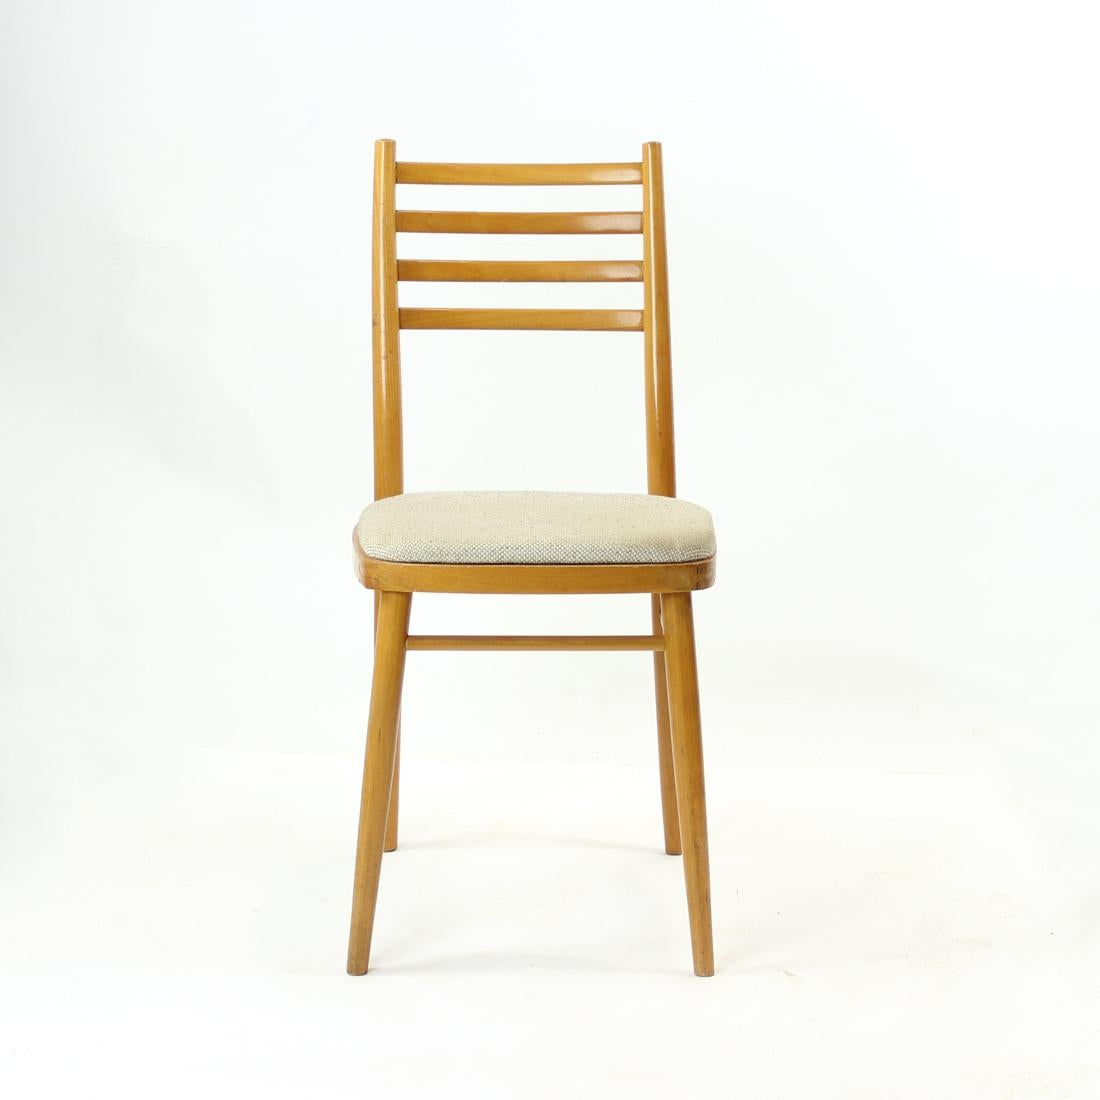 Great single chair in typical midcentury design. Produced out of oak wood in blond stain. Beautiful design features and details. The seat is upholstered in an original fabric in light cream & straw color. Elegant design. Produced by Drevounia fabric